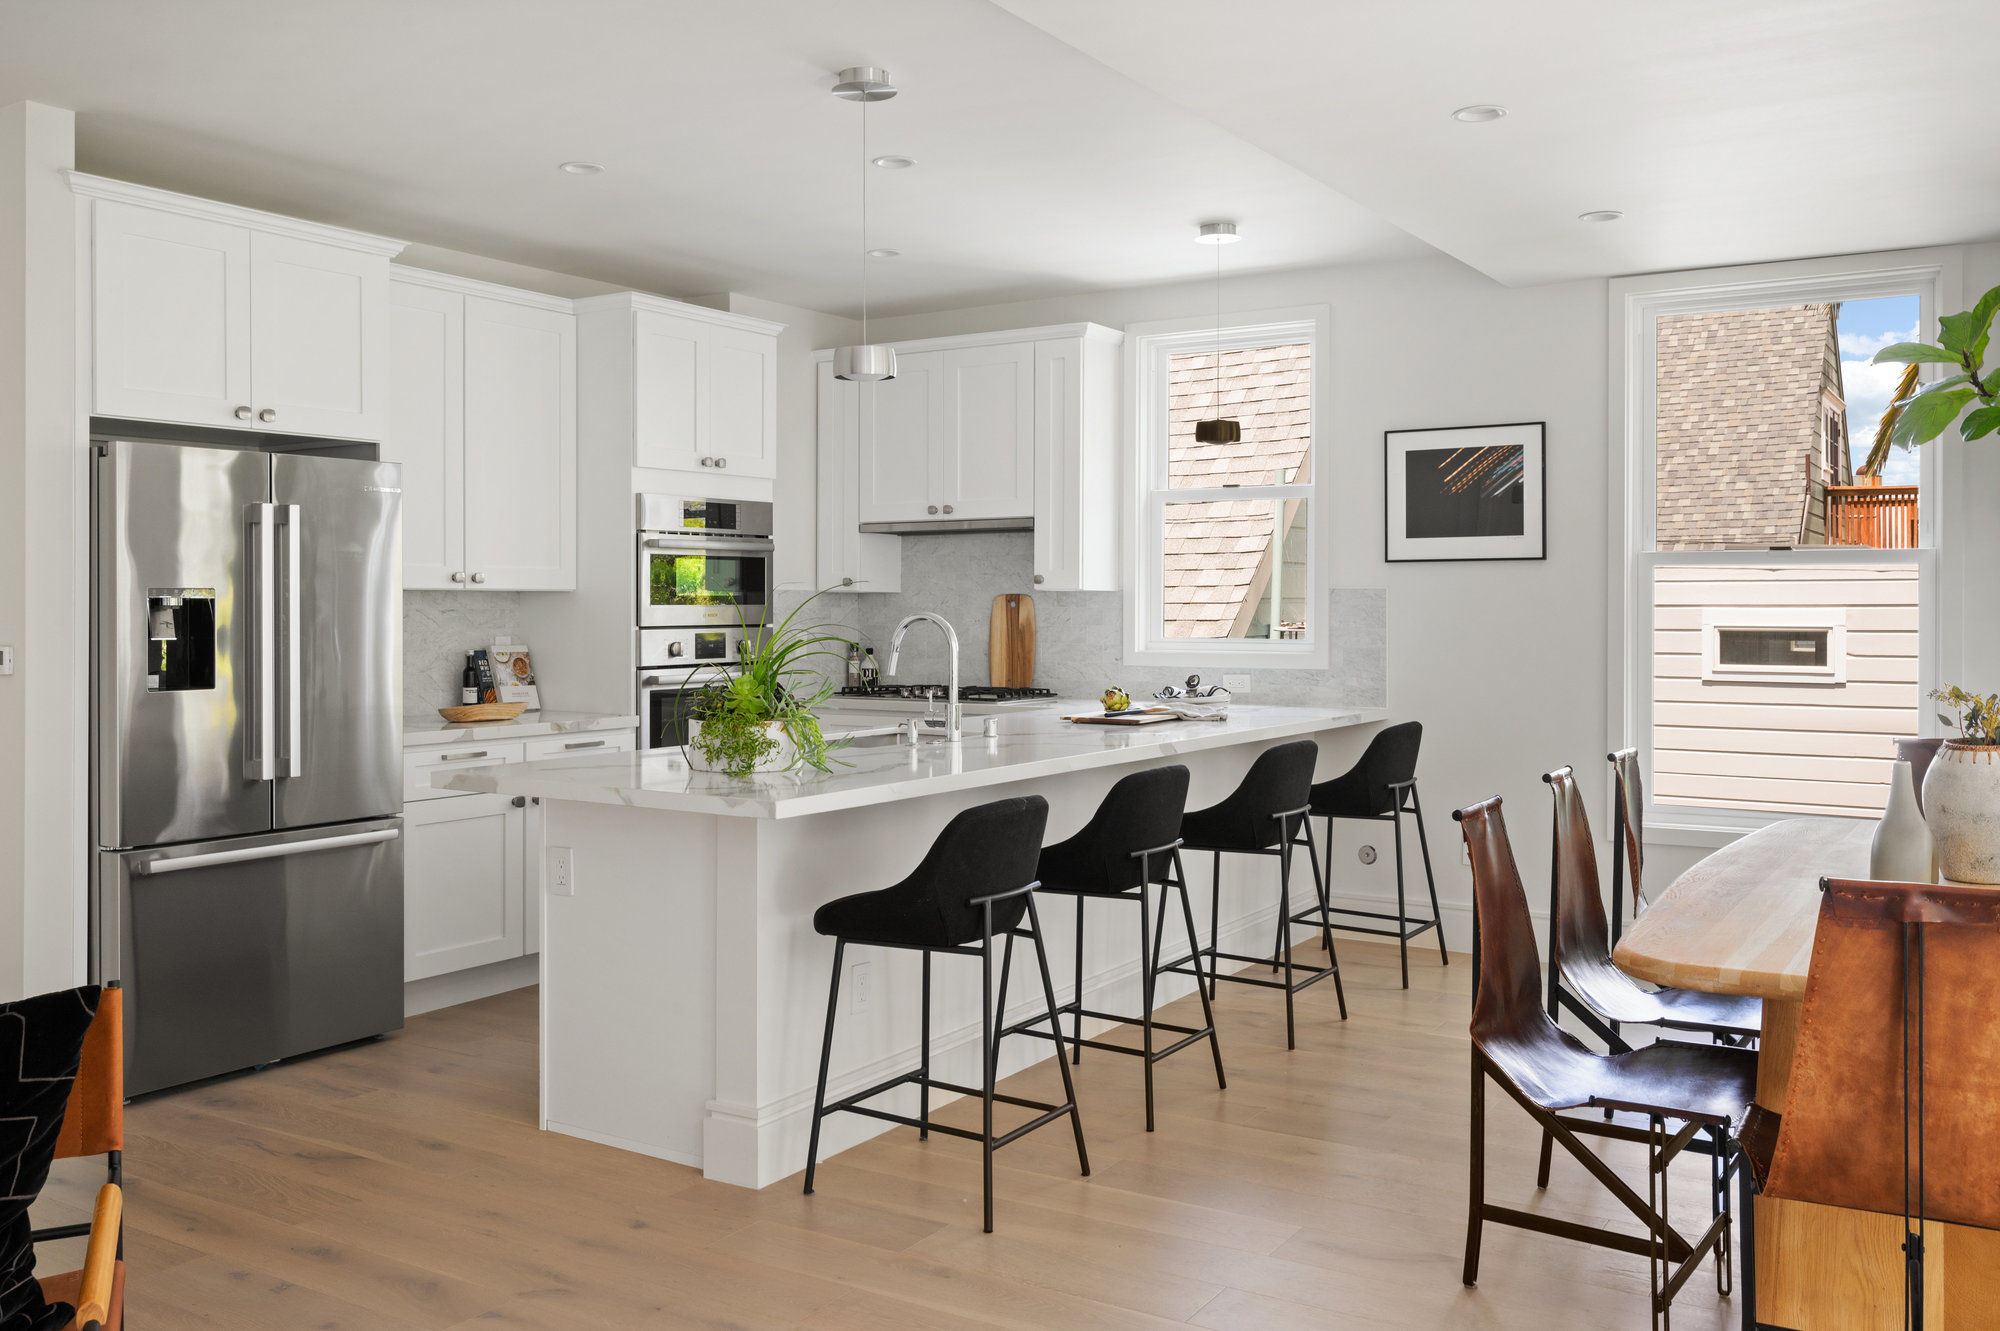 Property Photo: The kitchen has all white cabinets and stainless steel appliances.